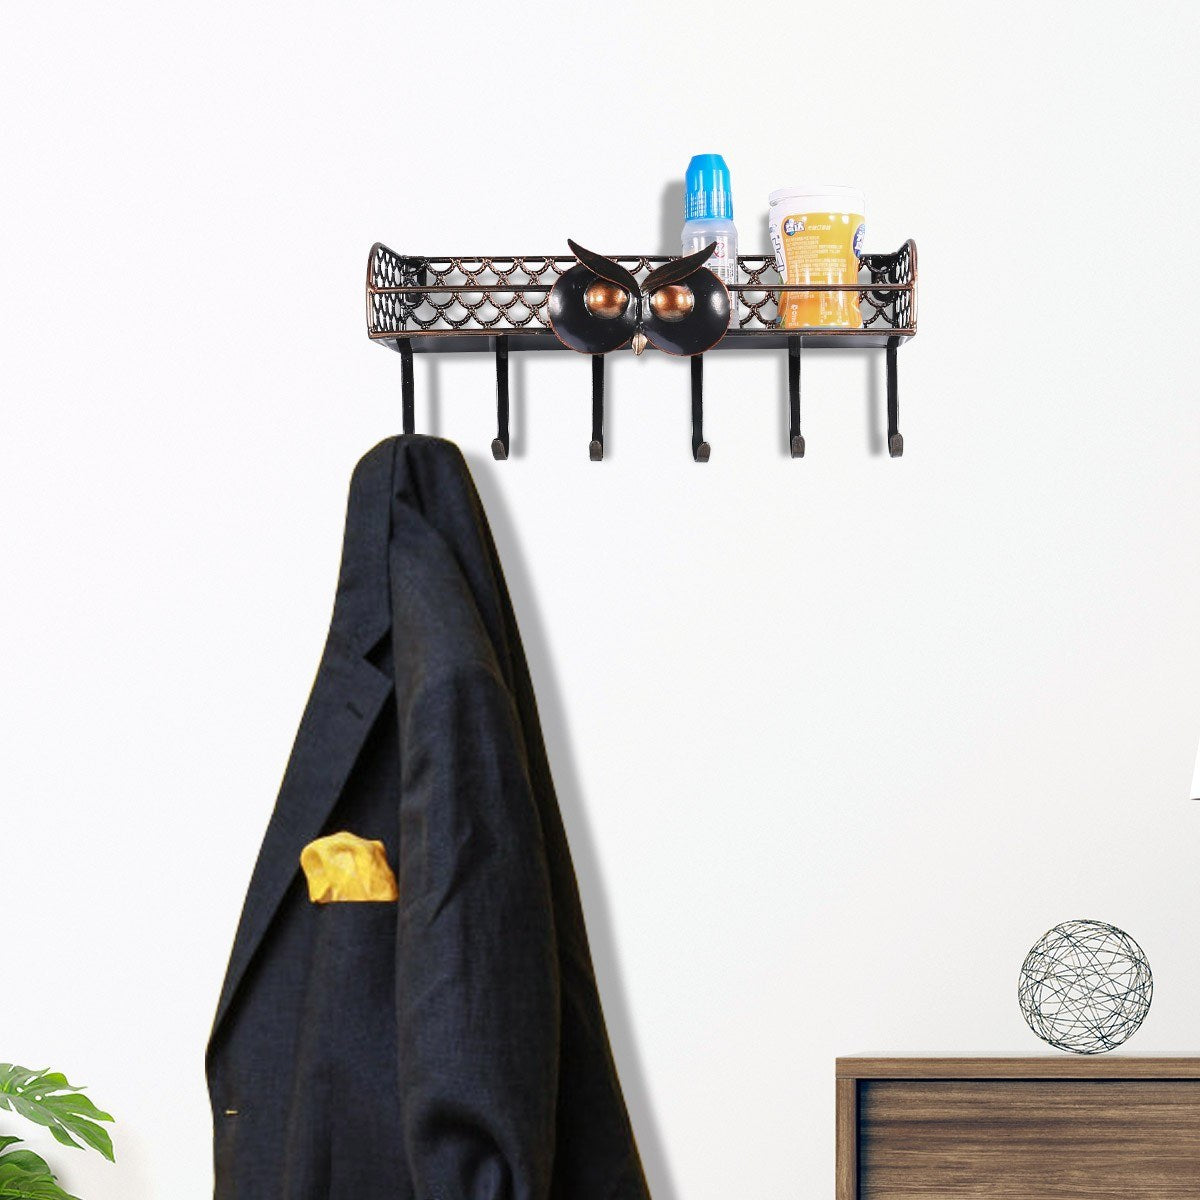 Coat Rack and Wall Mounted Shelves for Key Holder or Kitchen Organizer Black Color and Owl Feature